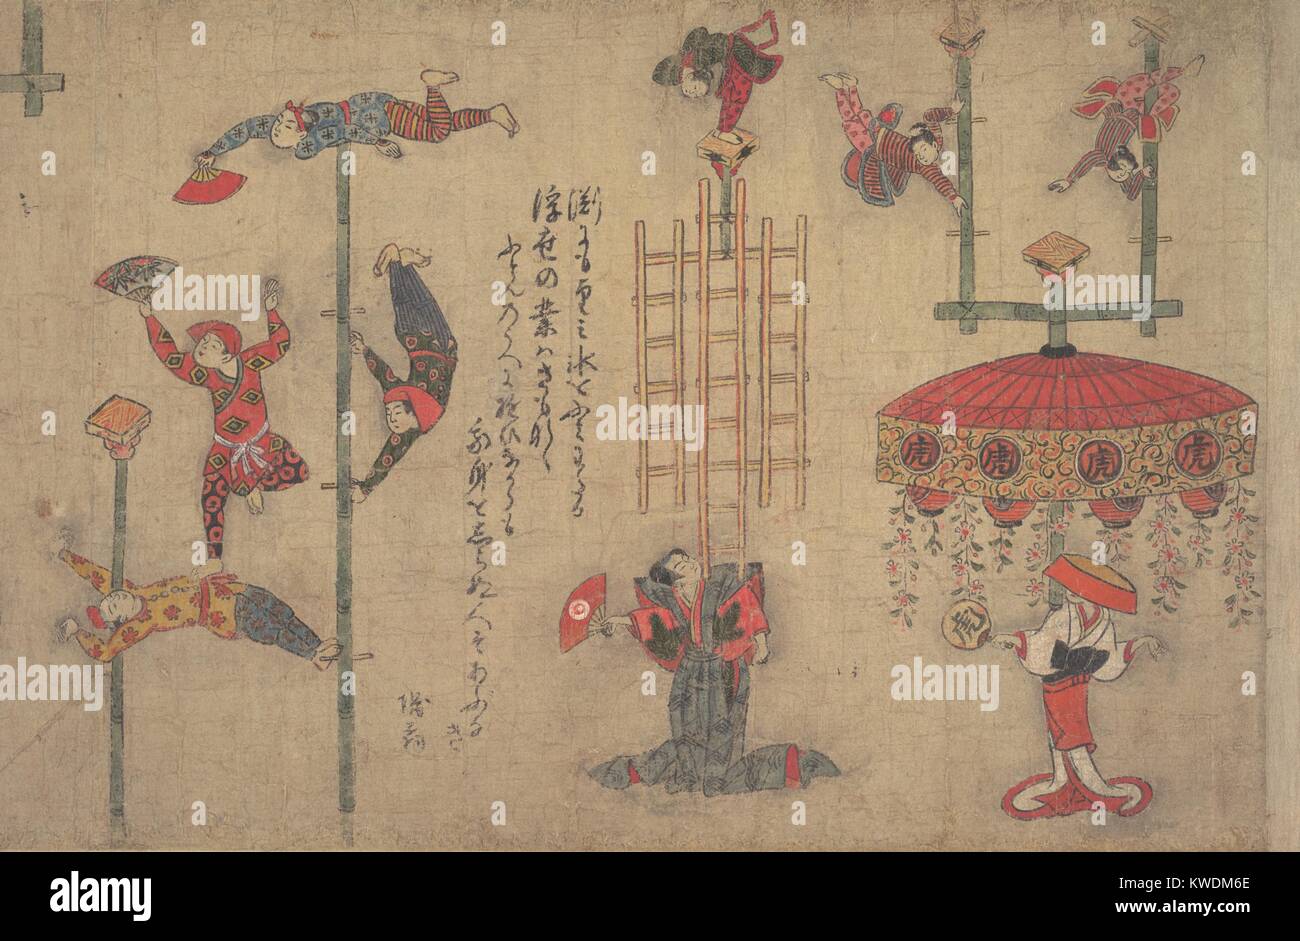 ACROBATS, 1880s, Japanese painting, ink and color on paper. Acrobats perform using bamboo poles and other props for balancing acts. In the cities of the Edo period (1615–1868), Japanese elites would sponsor such troupes for public entertainment. Poems on the scroll humorously compare acrobatic feats with daily life (BSLOC 2017 16 11) Stock Photo